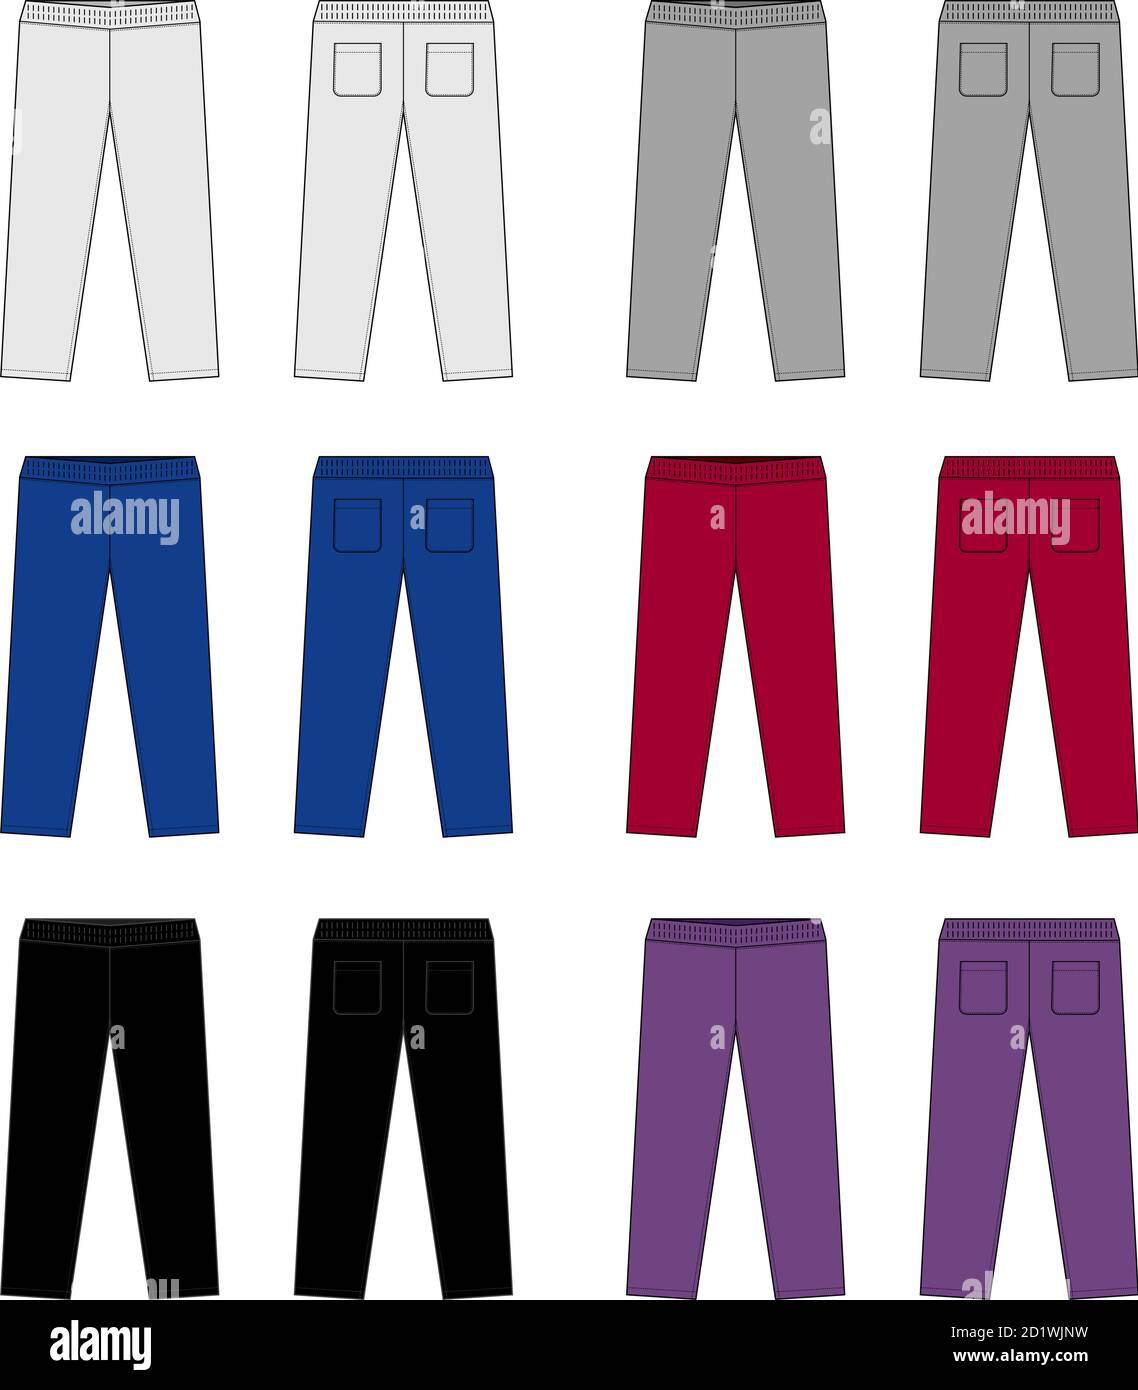 Sweatpants Stock Vector Images - Page 3 - Alamy